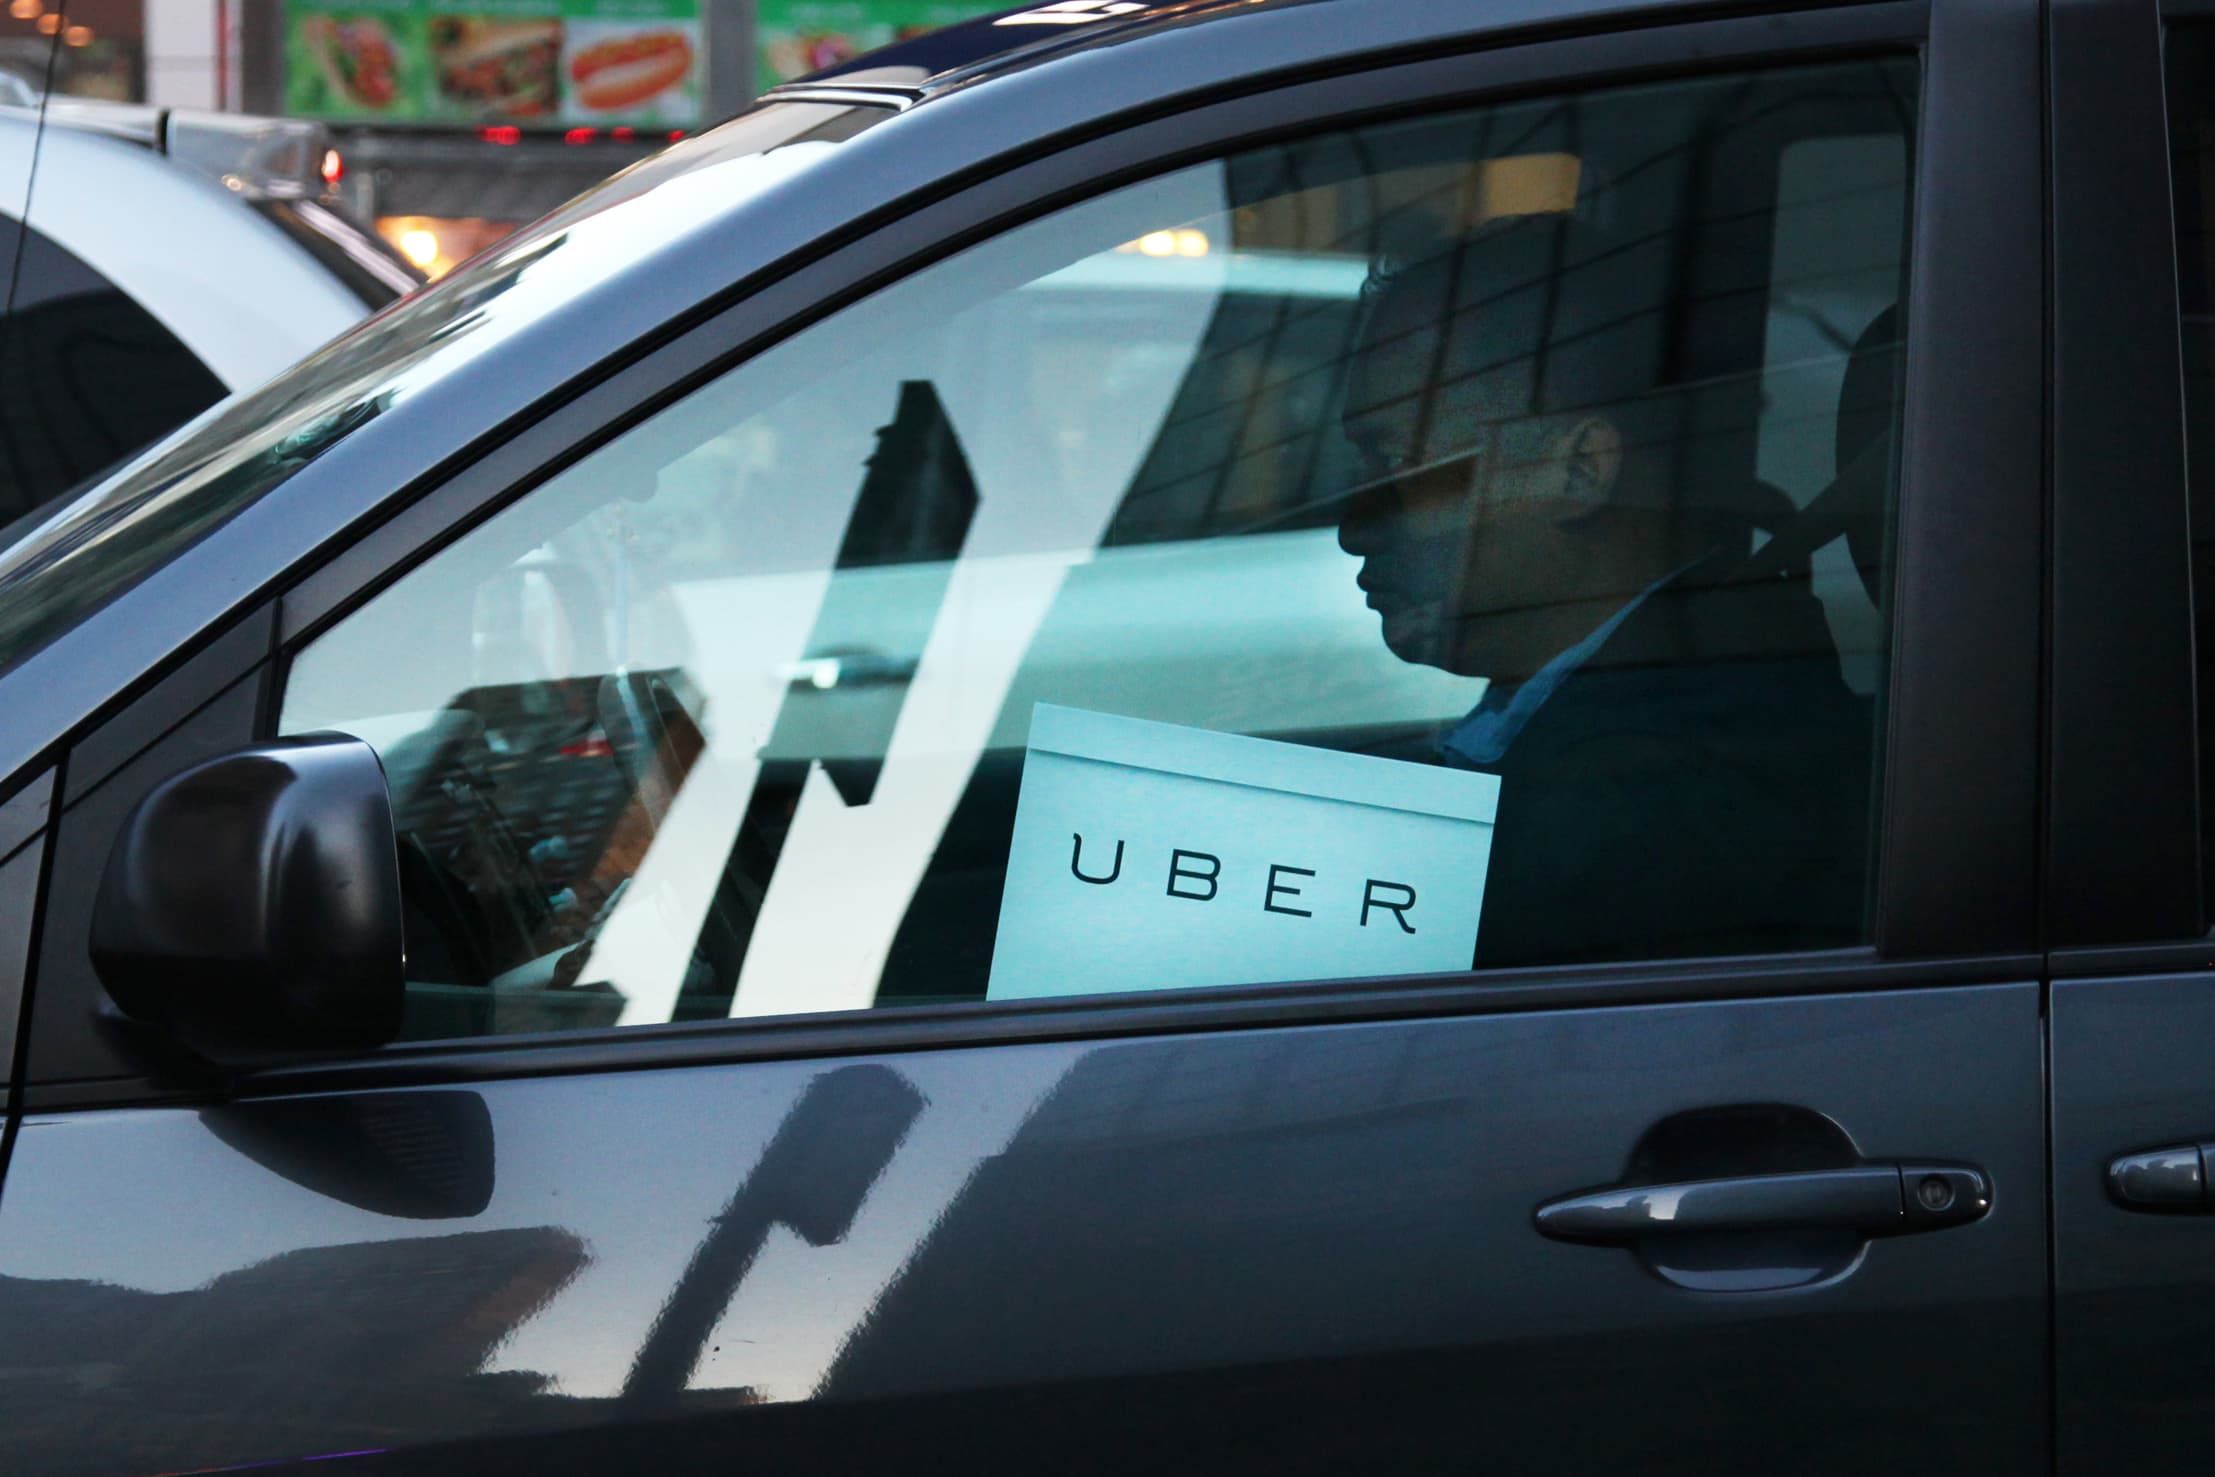 Uber can now track your flight so a ride home is ready when you land